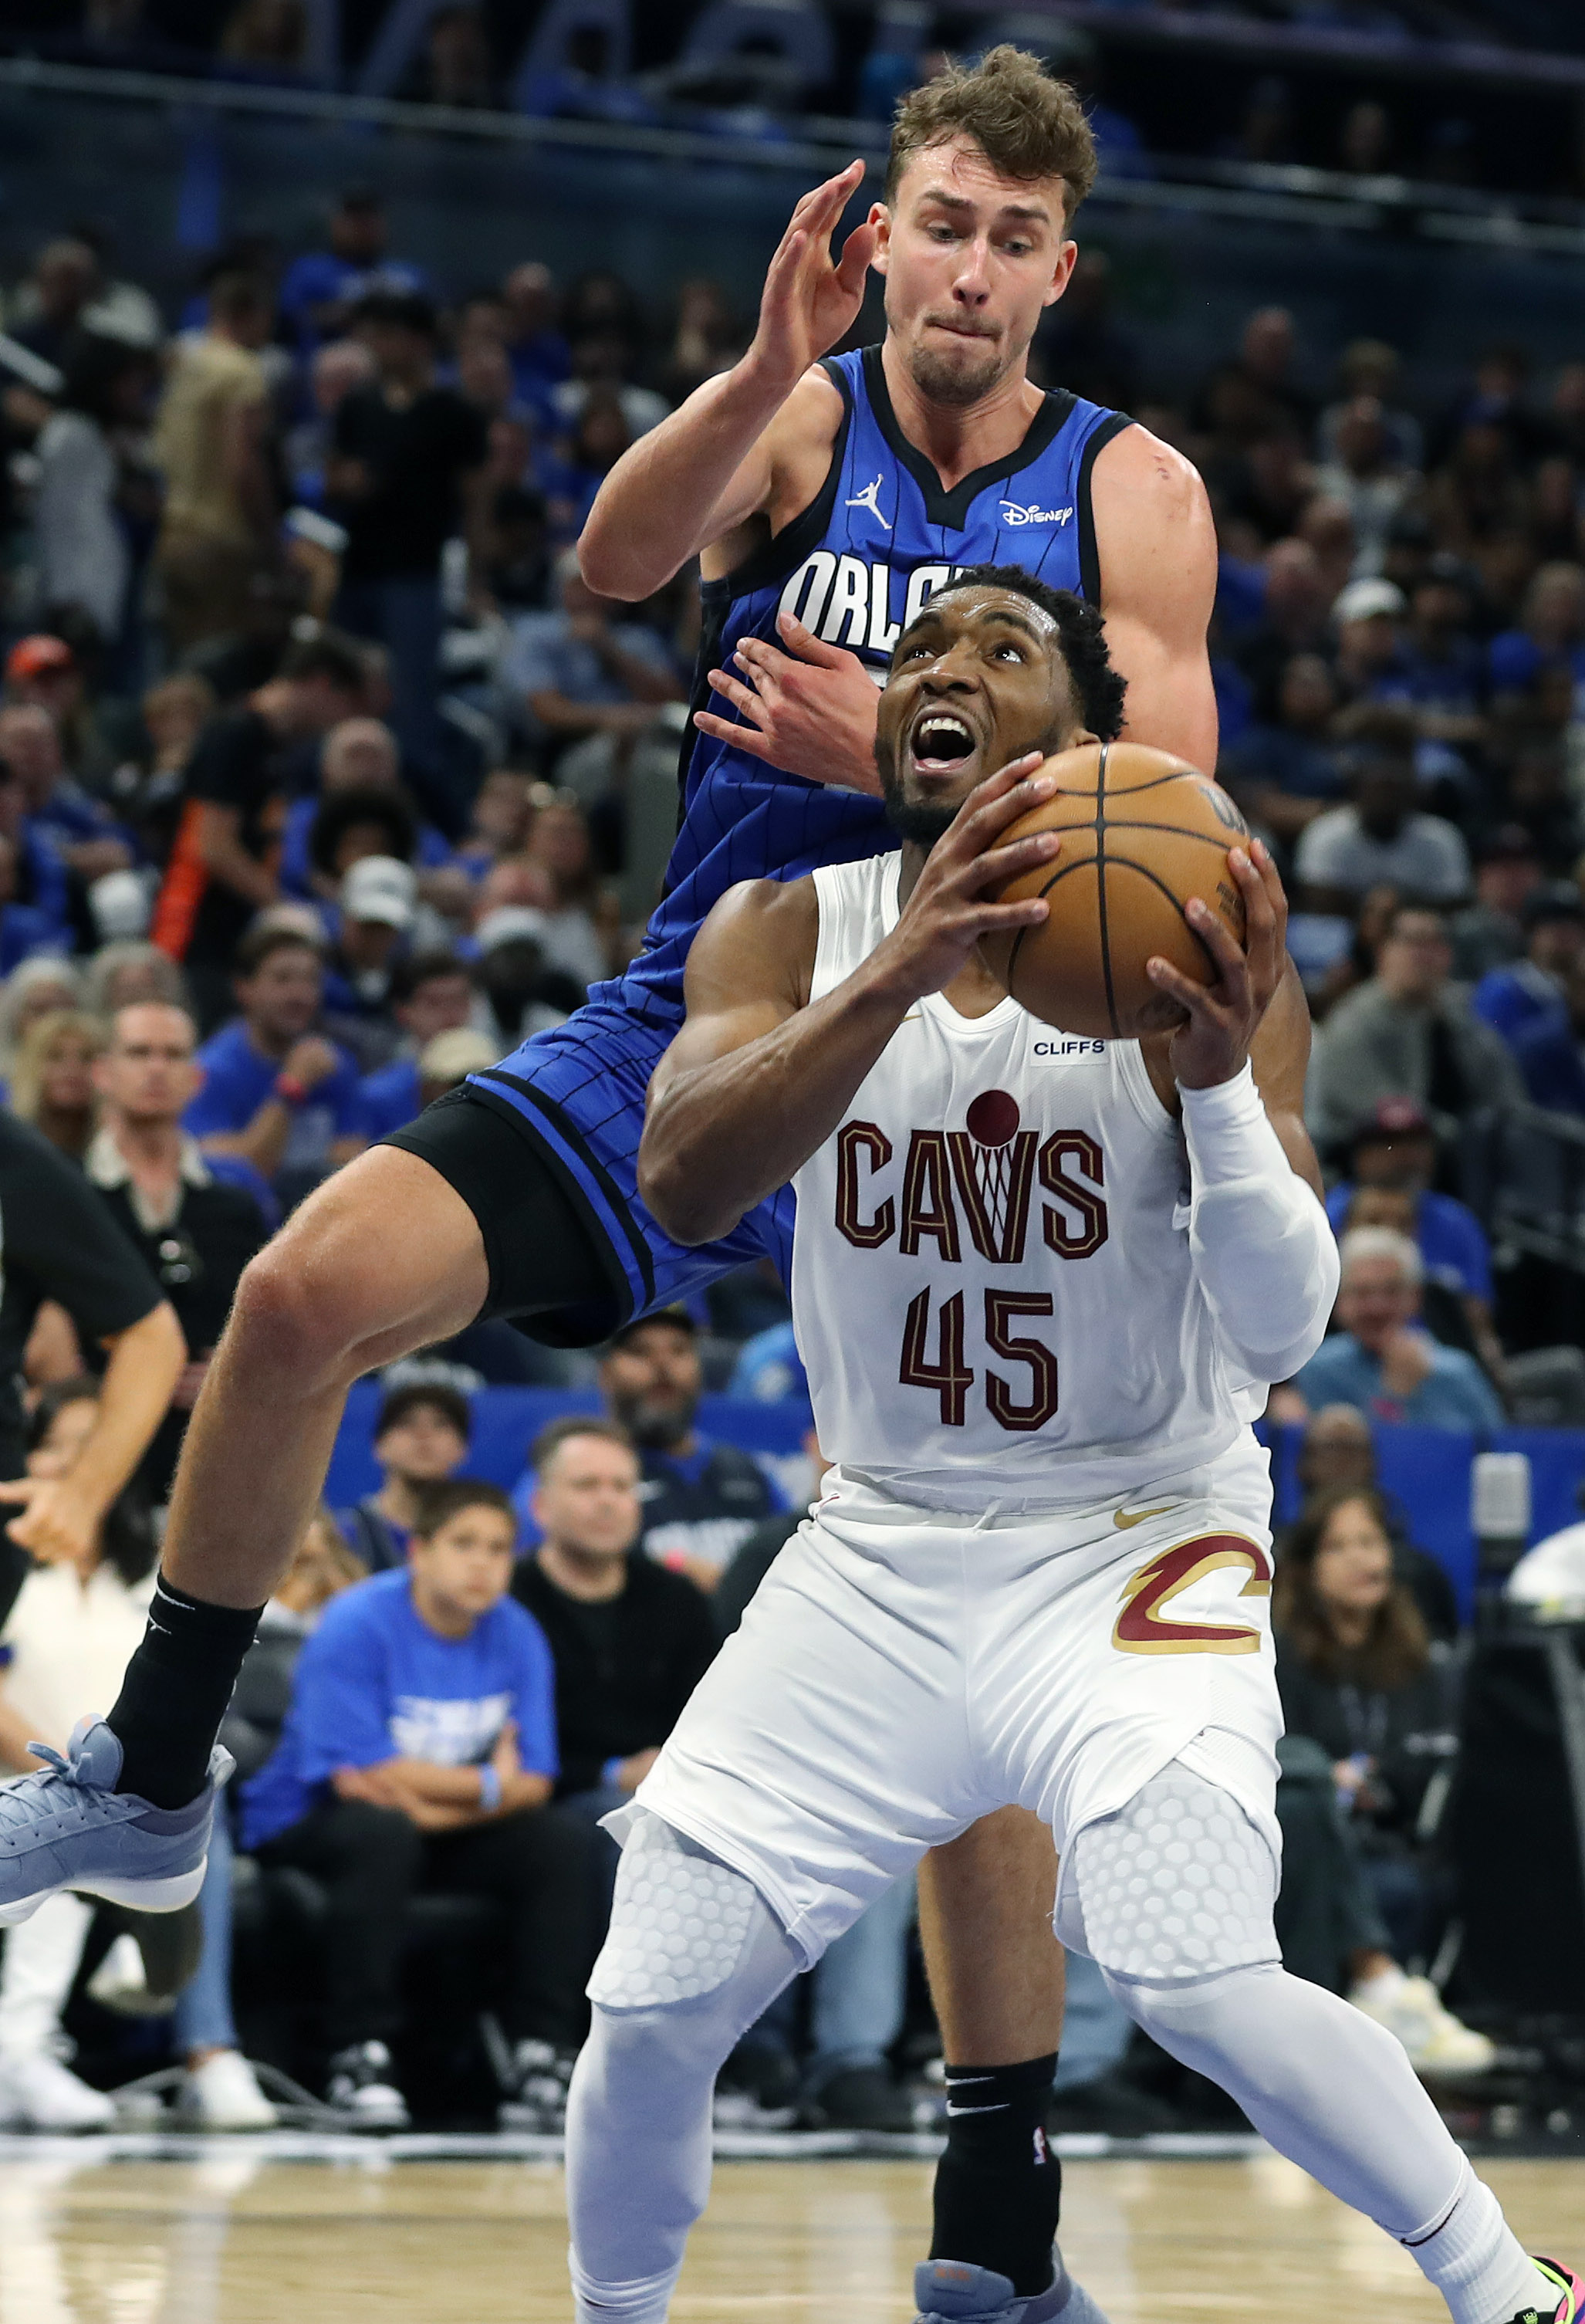 After leading the Cavs to a first-round victory against the Magic, Donovan Mitchell, drawing a challenge from Franz Wagner with a pump fake, received $150 million to stay in Cleveland. (Stephen M. Dowell/Orlando Sentinel)